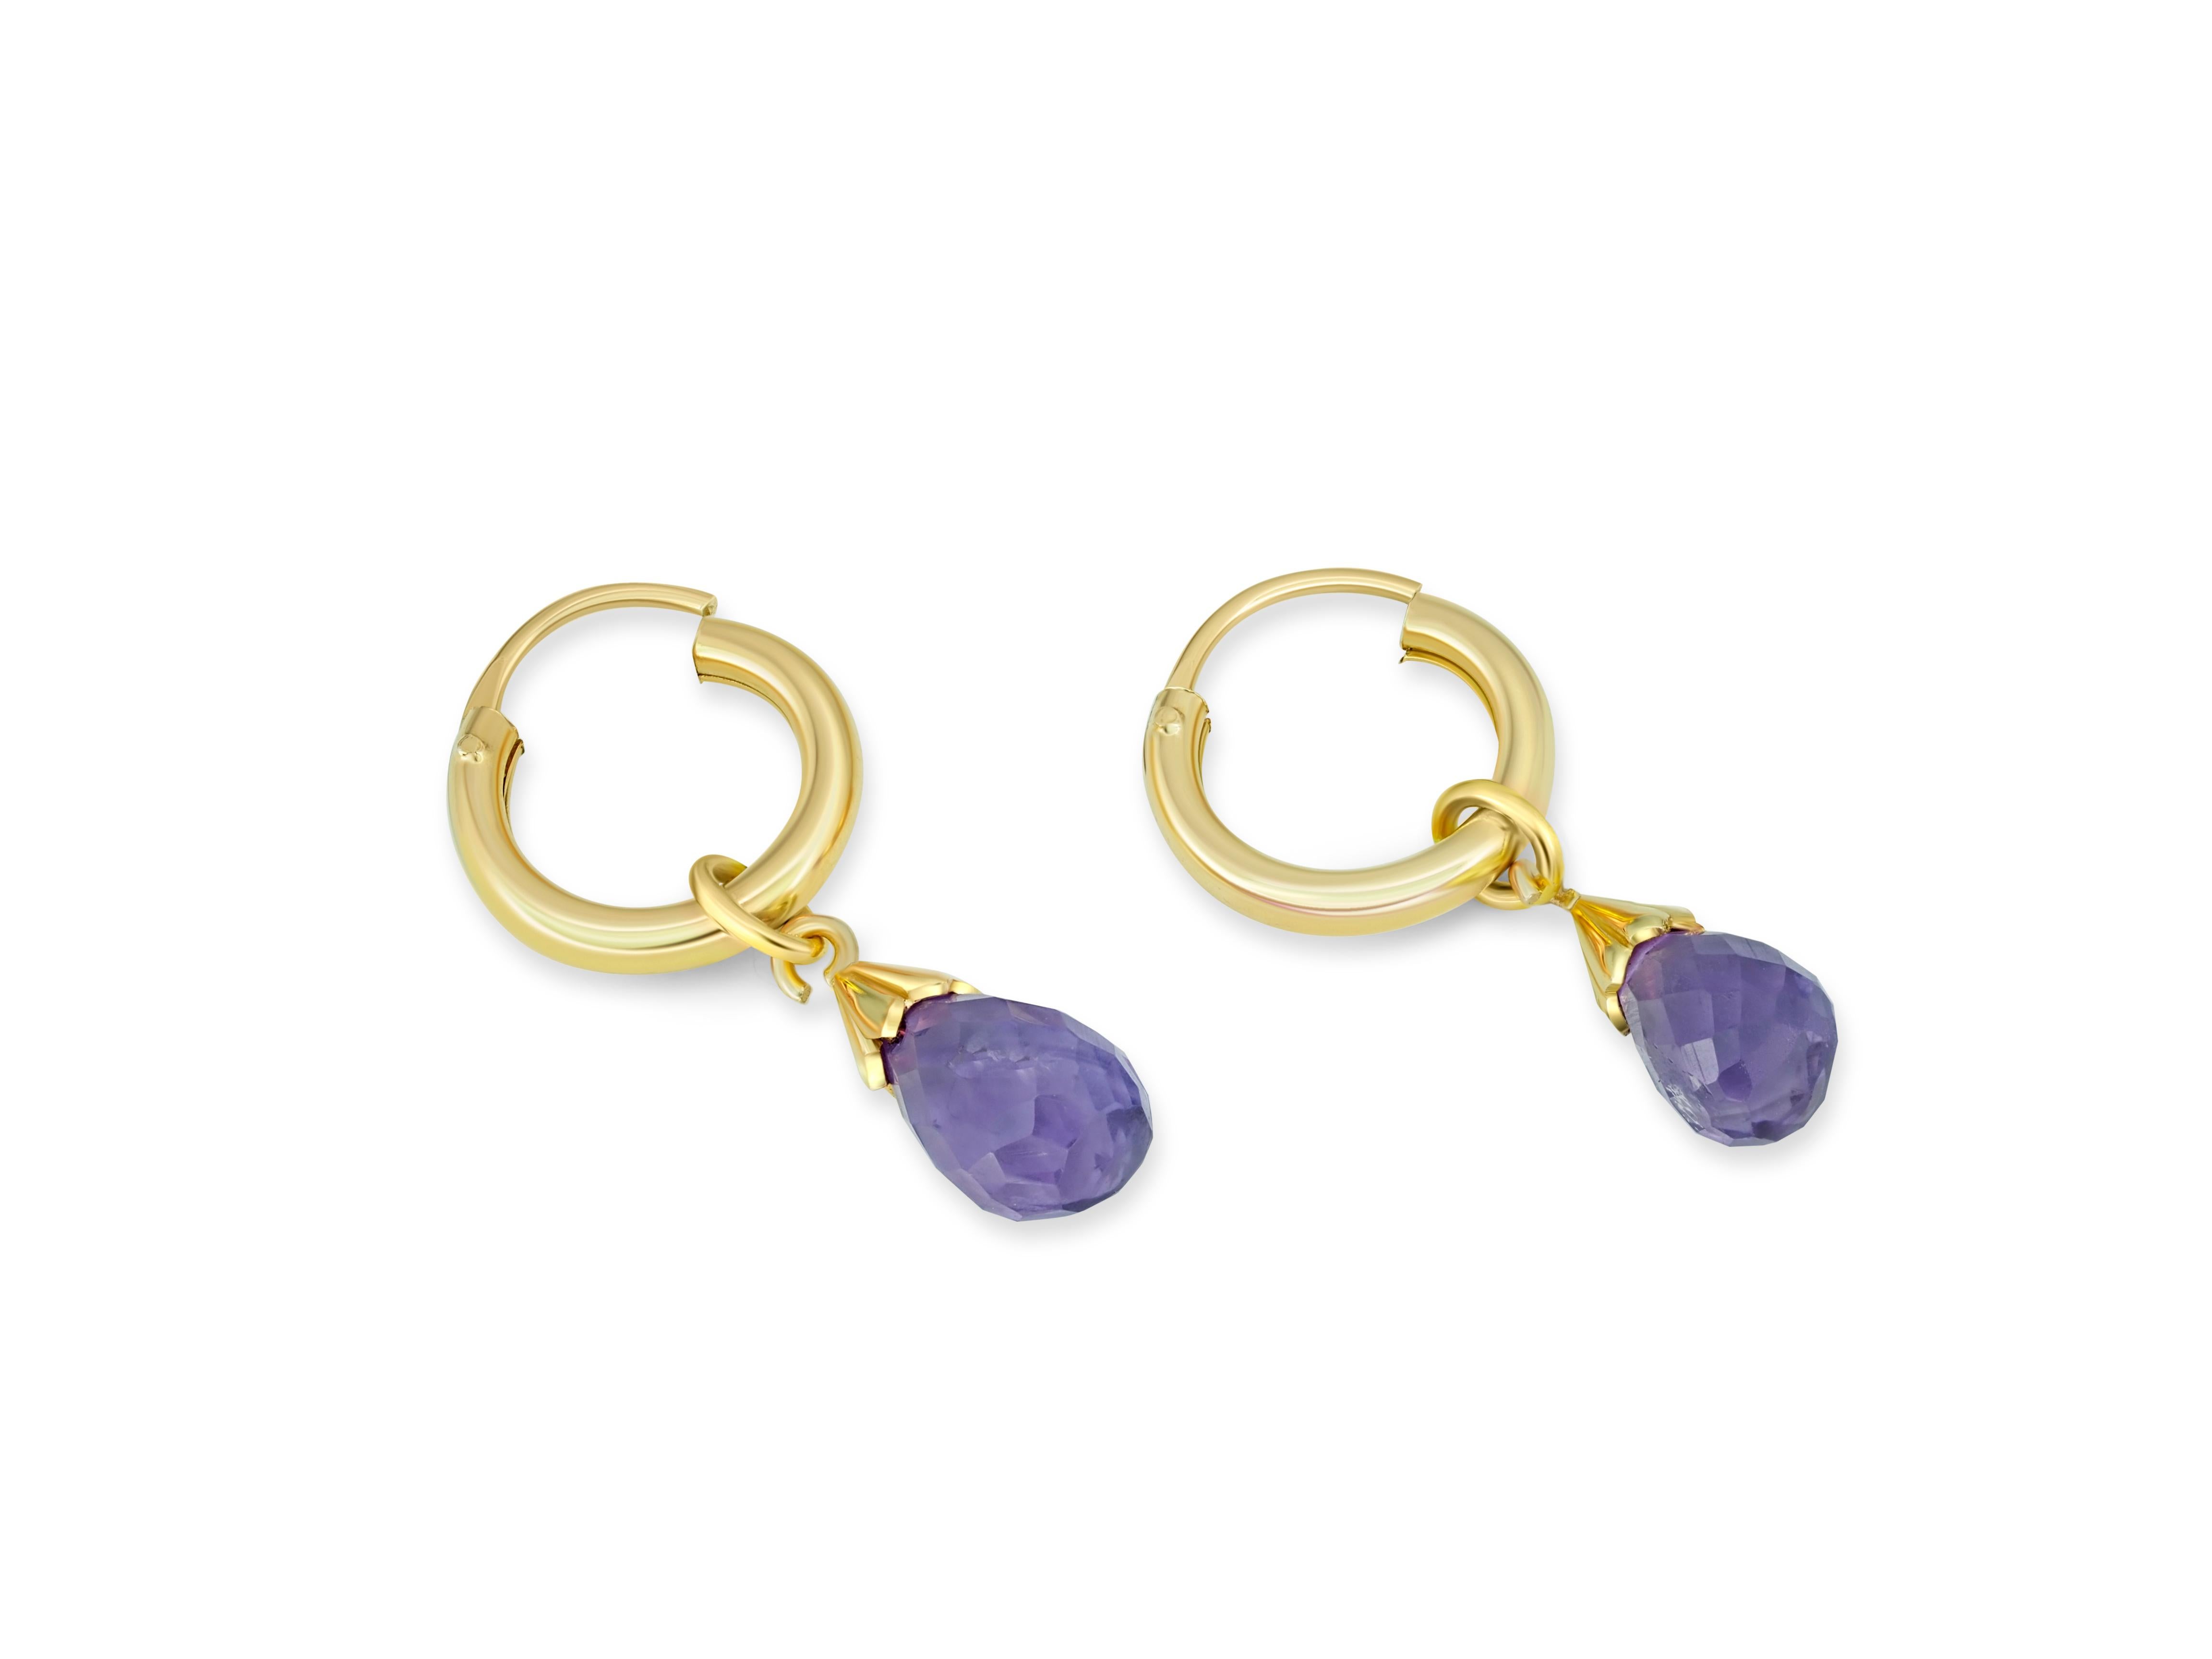 Hoop Earrings and Amethyst Briolette Charms in 14k Gold For Sale 3